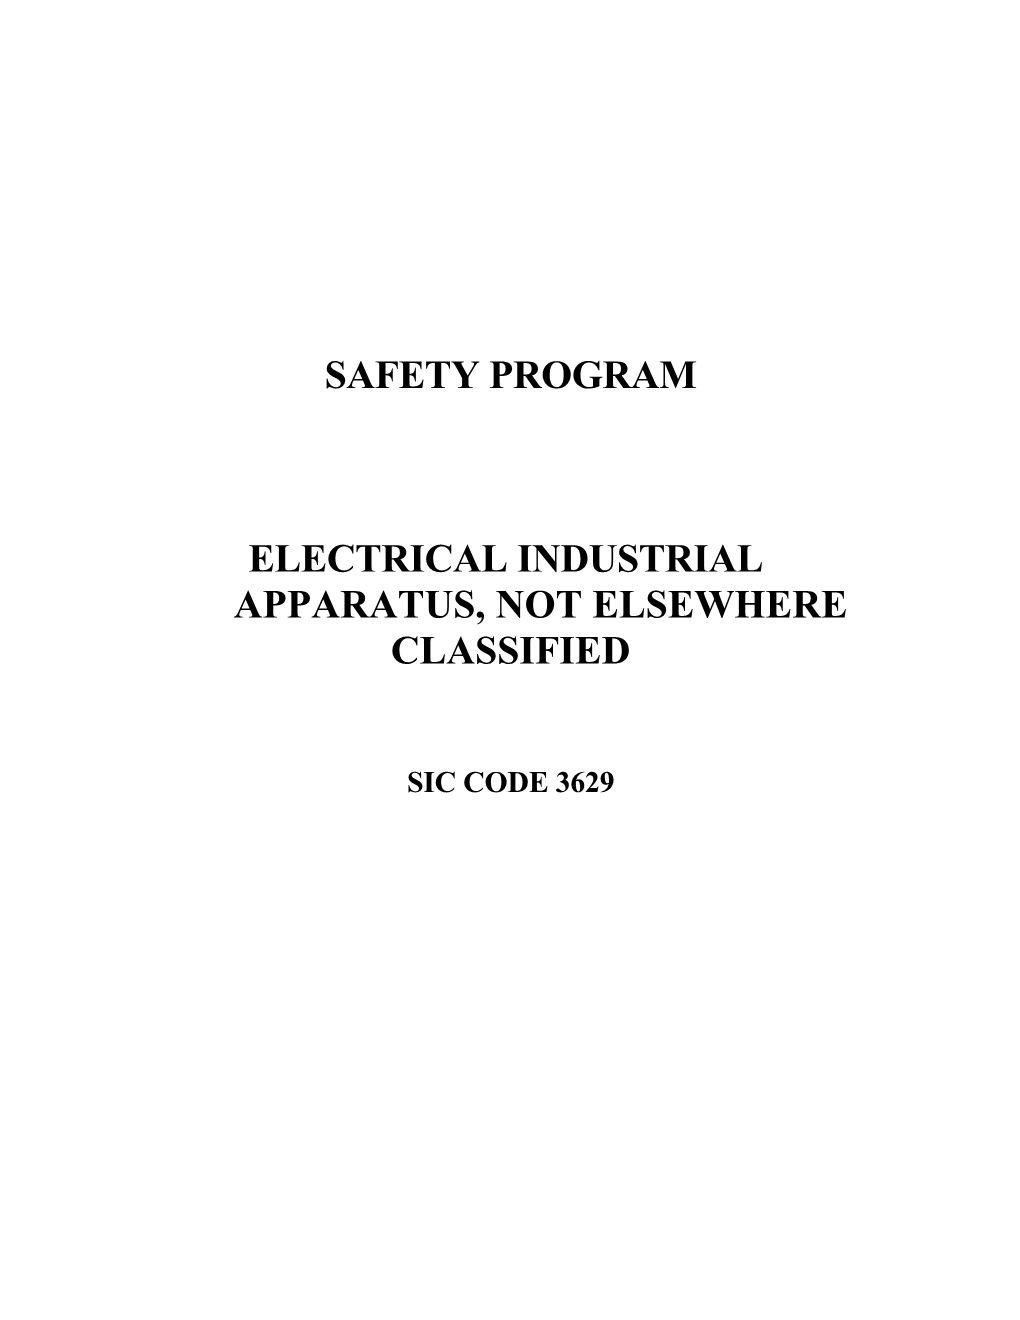 Electrical Industrial Apparatus Safety Program